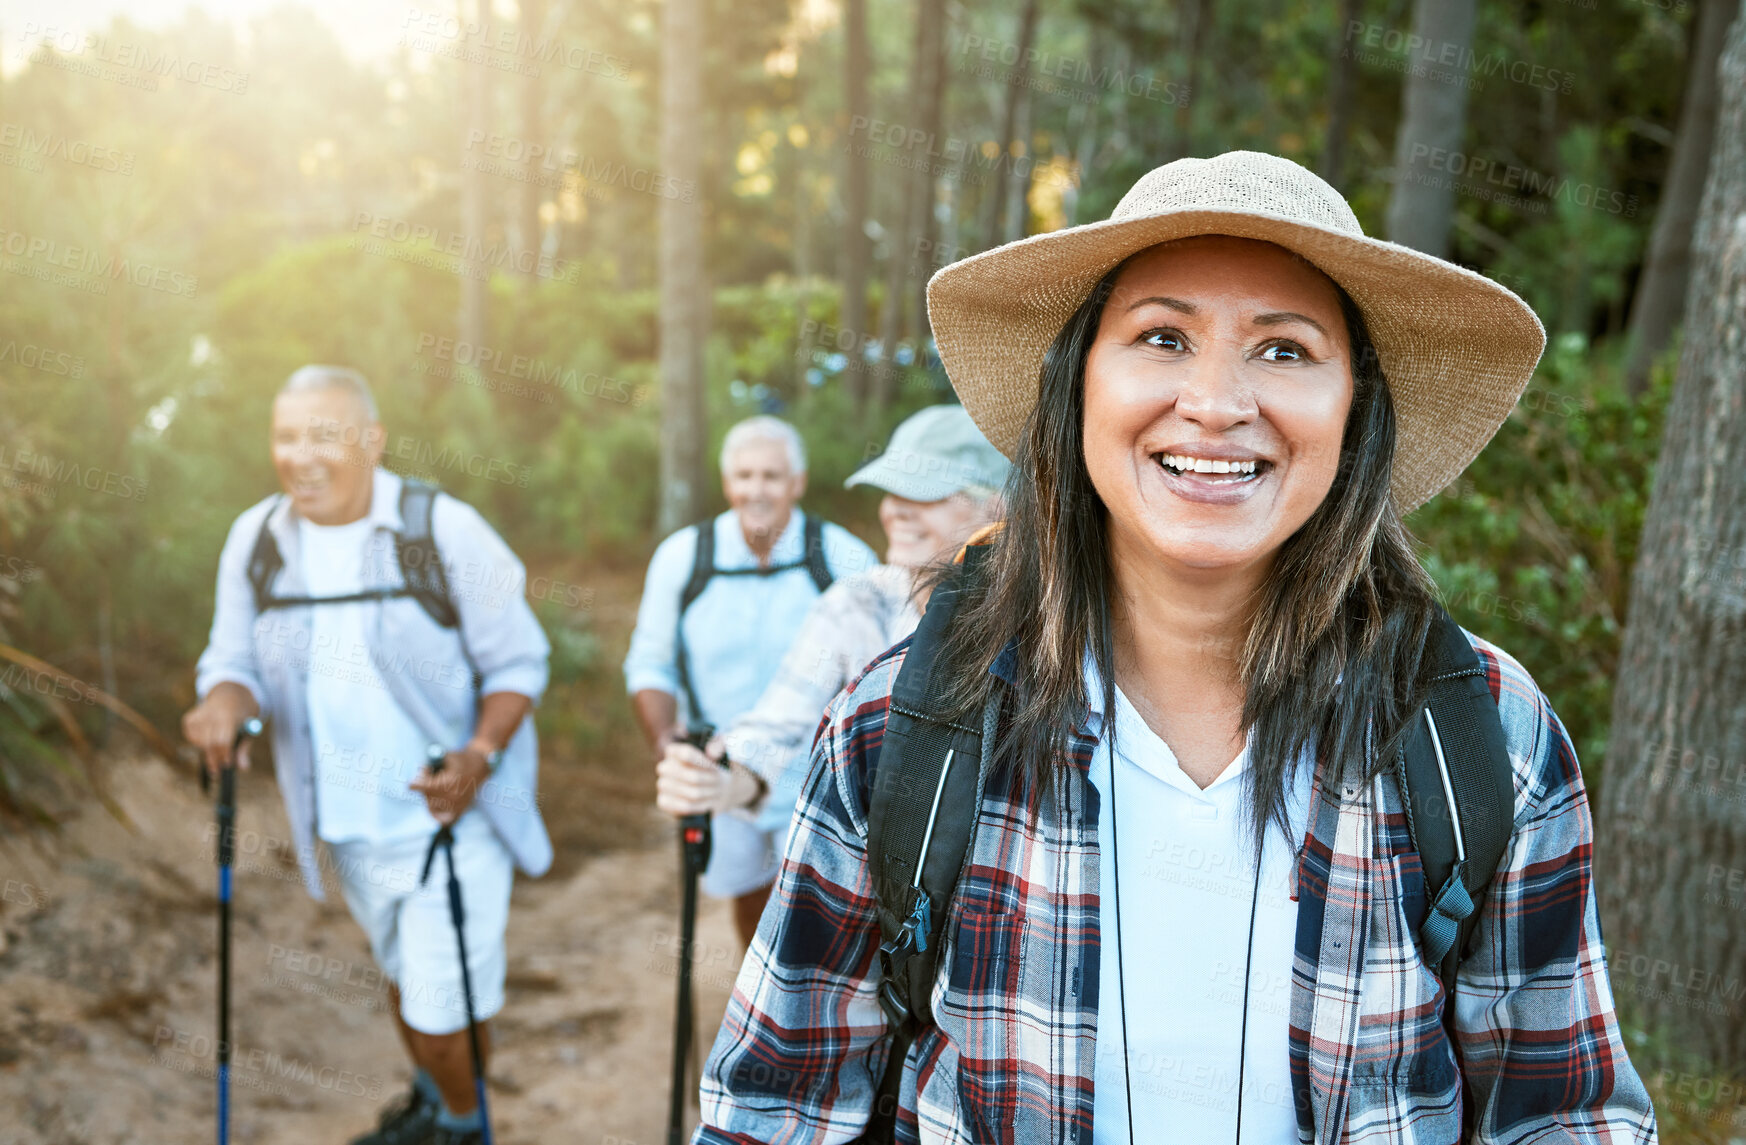 Buy stock photo Hiking, adventure and exploring with a senior woman and her retired friends on a hike outdoors in nature. Enjoying a walk or journey of discover in the forest or woods for leisure and recreation